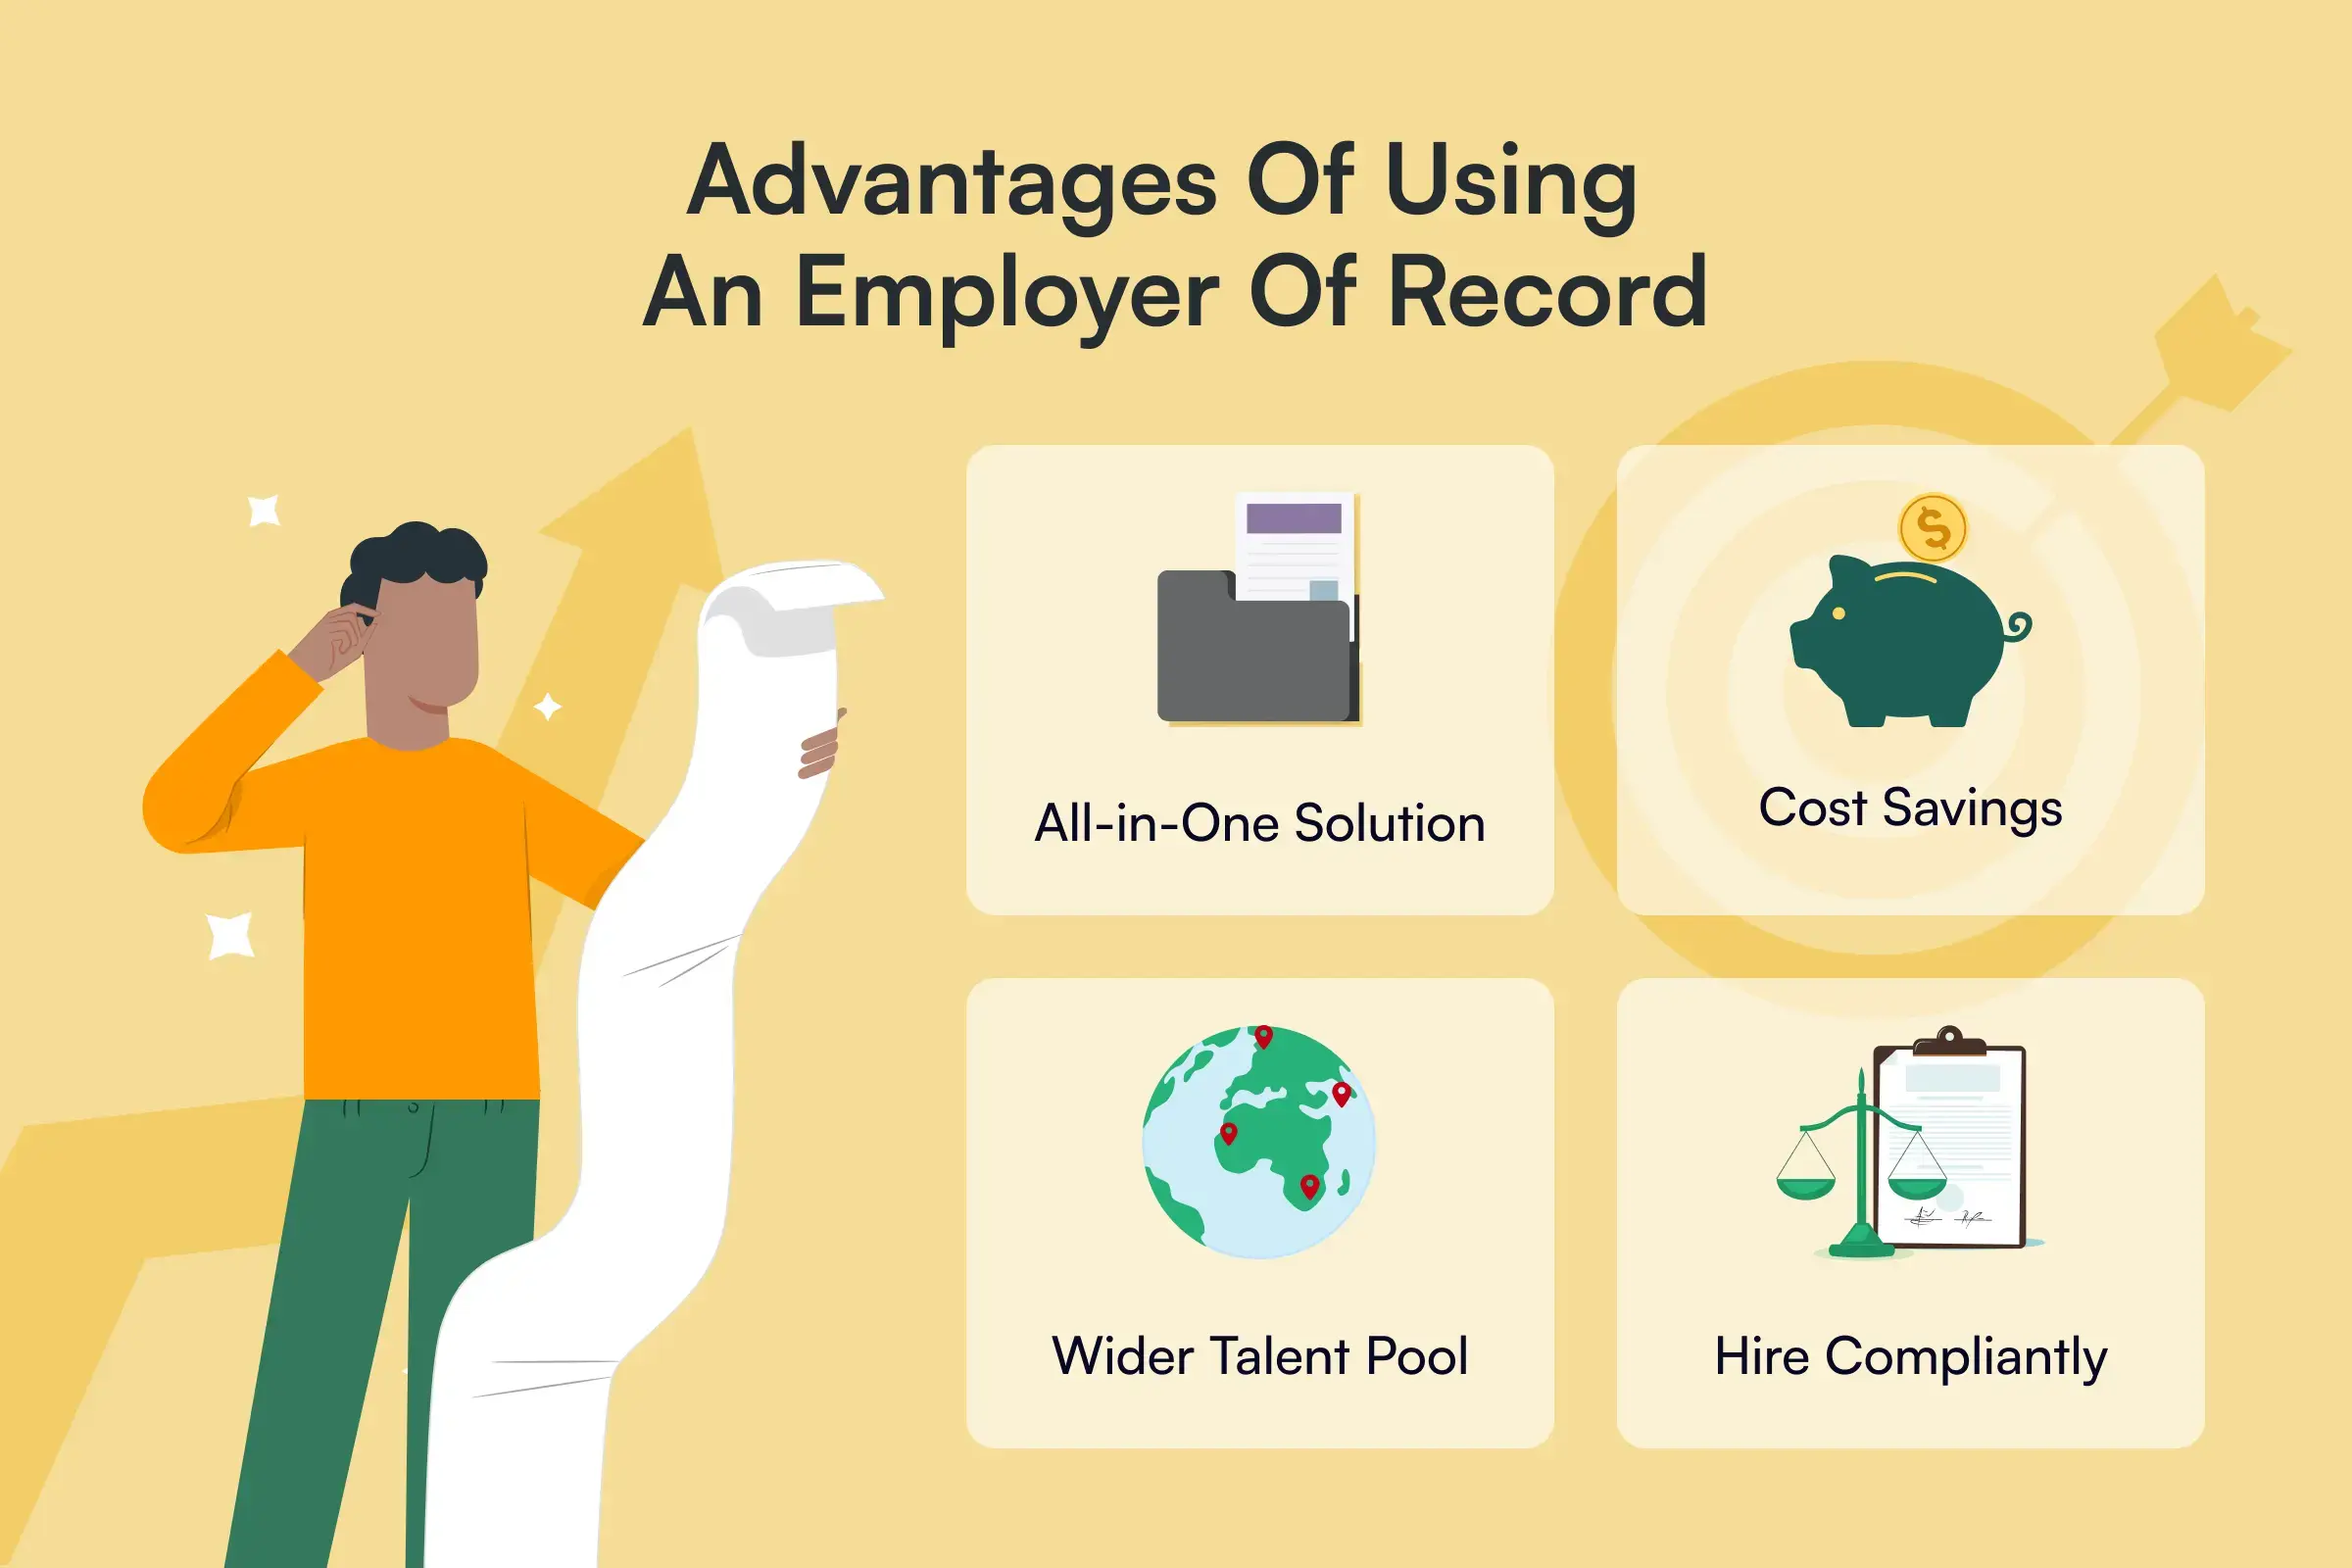 Advantages of using an employer of record